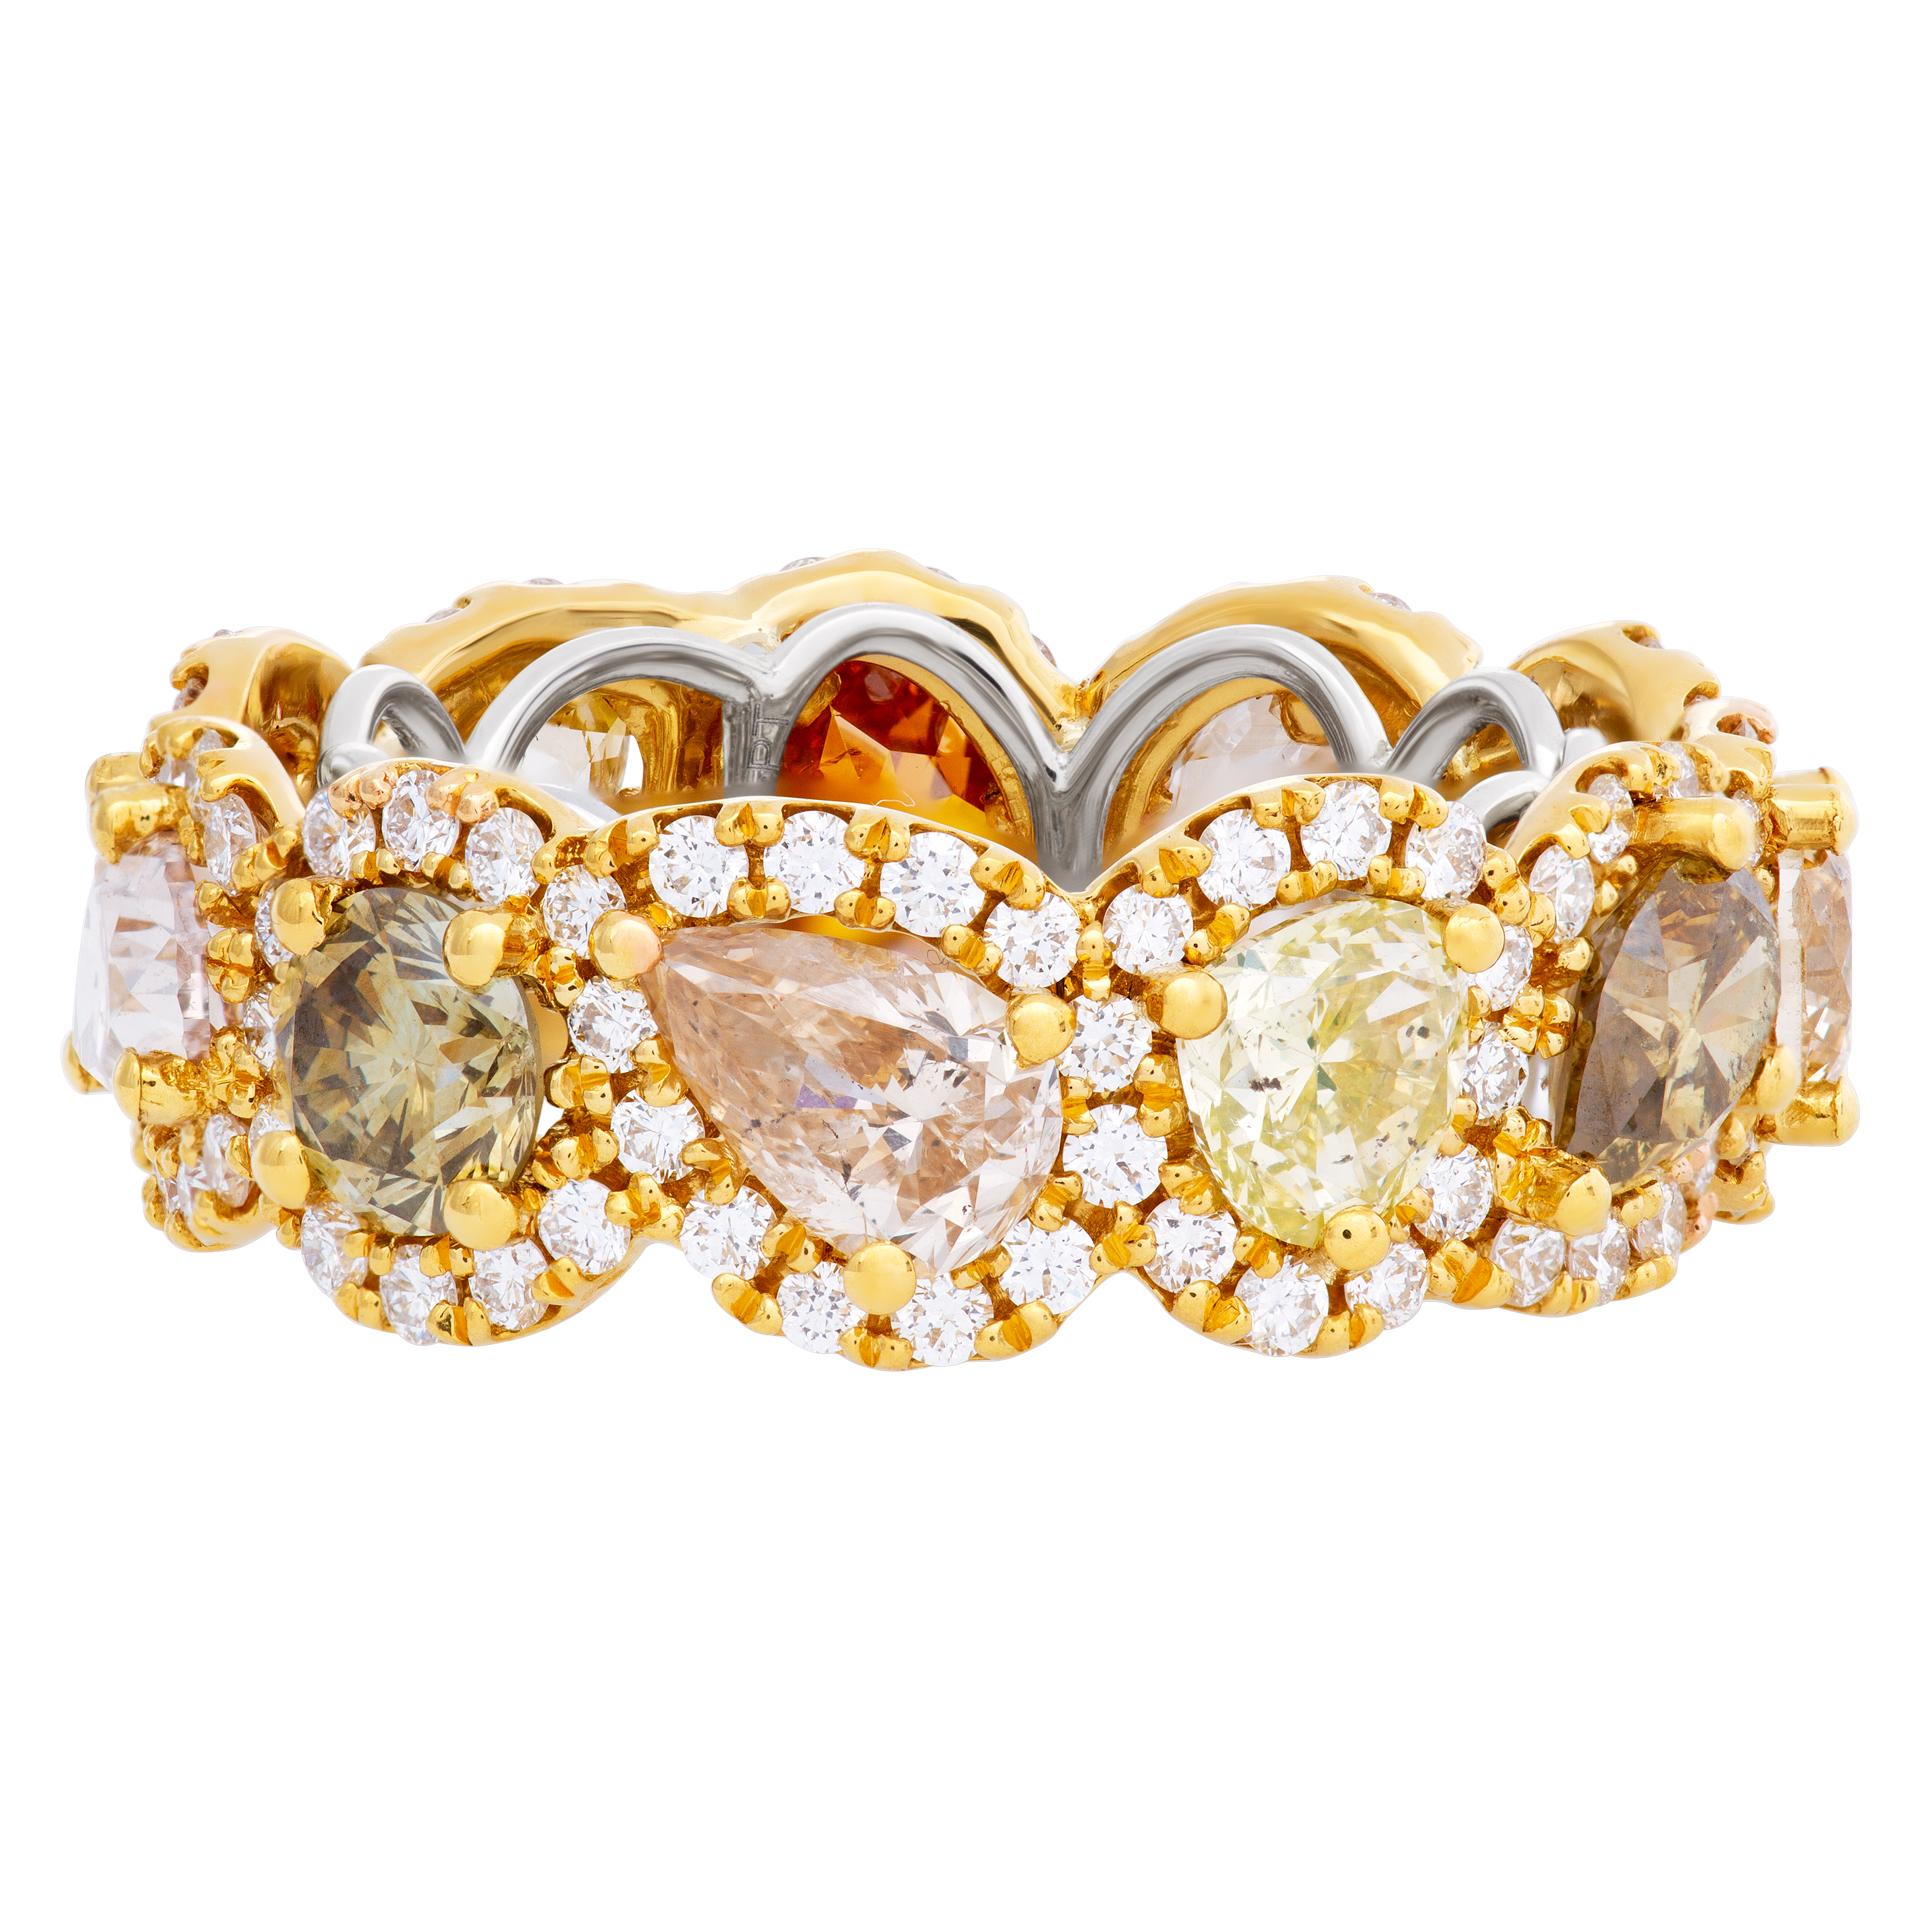 Gorgeous fancy cut diamond eternity band in platinum & 22k gold; 5.66 carats in multi colored yellow diamonds and 1.29 carats in white diamonds. Size 7.25

This Diamond ring is currently size 7.25 and some items can be sized up or down, please ask!